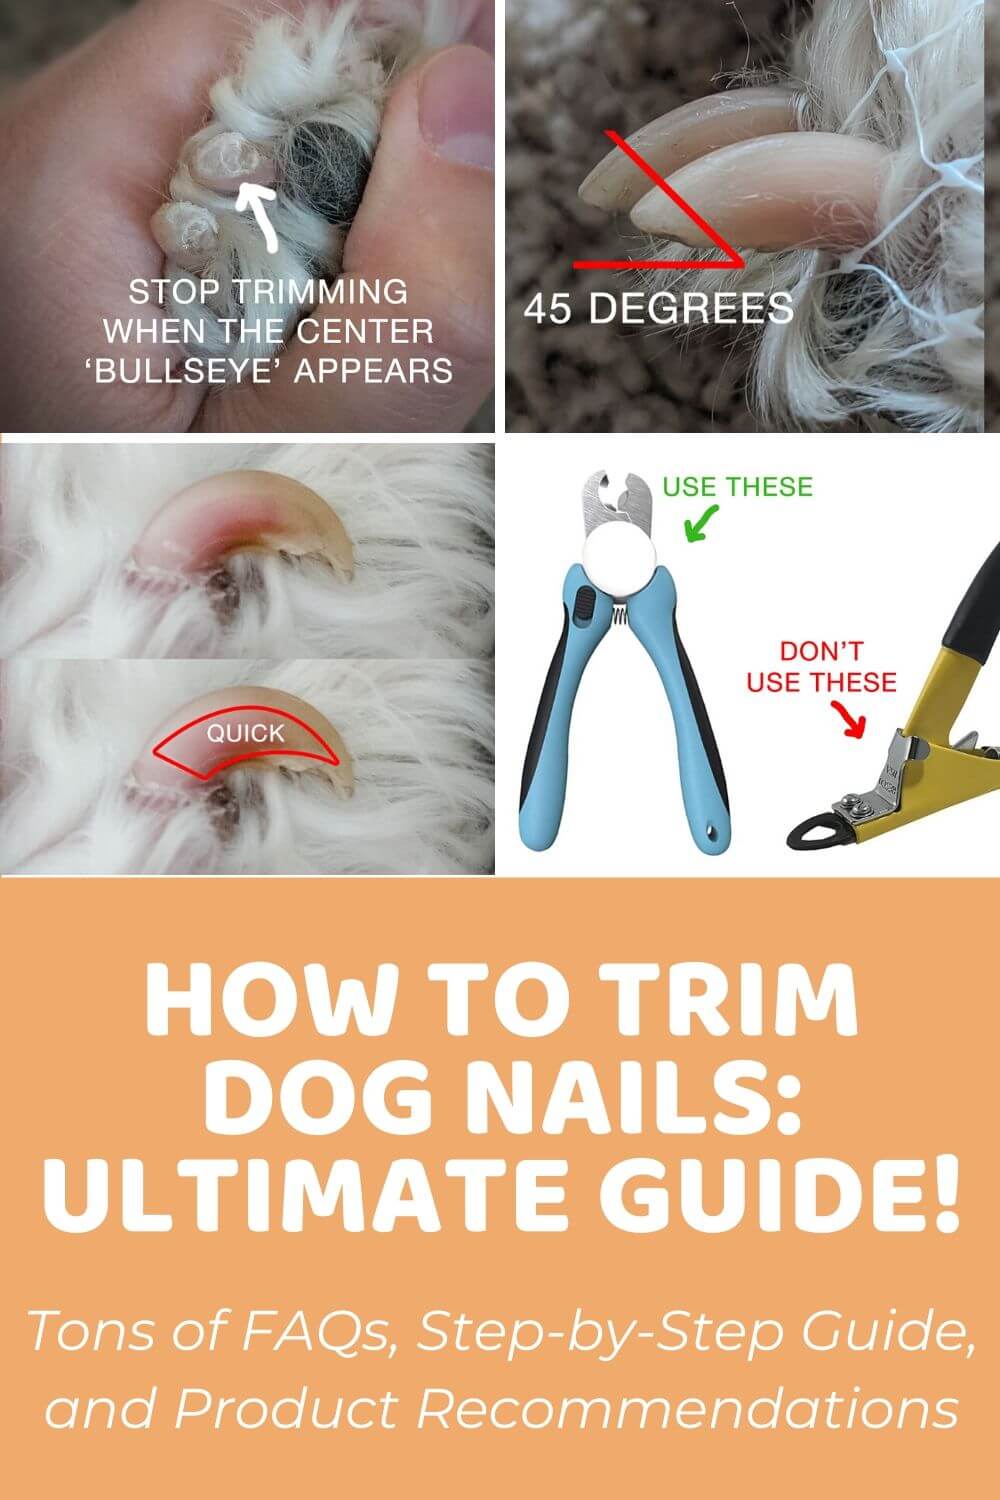 How to Trim Dog Nails: Ultimate Guide!